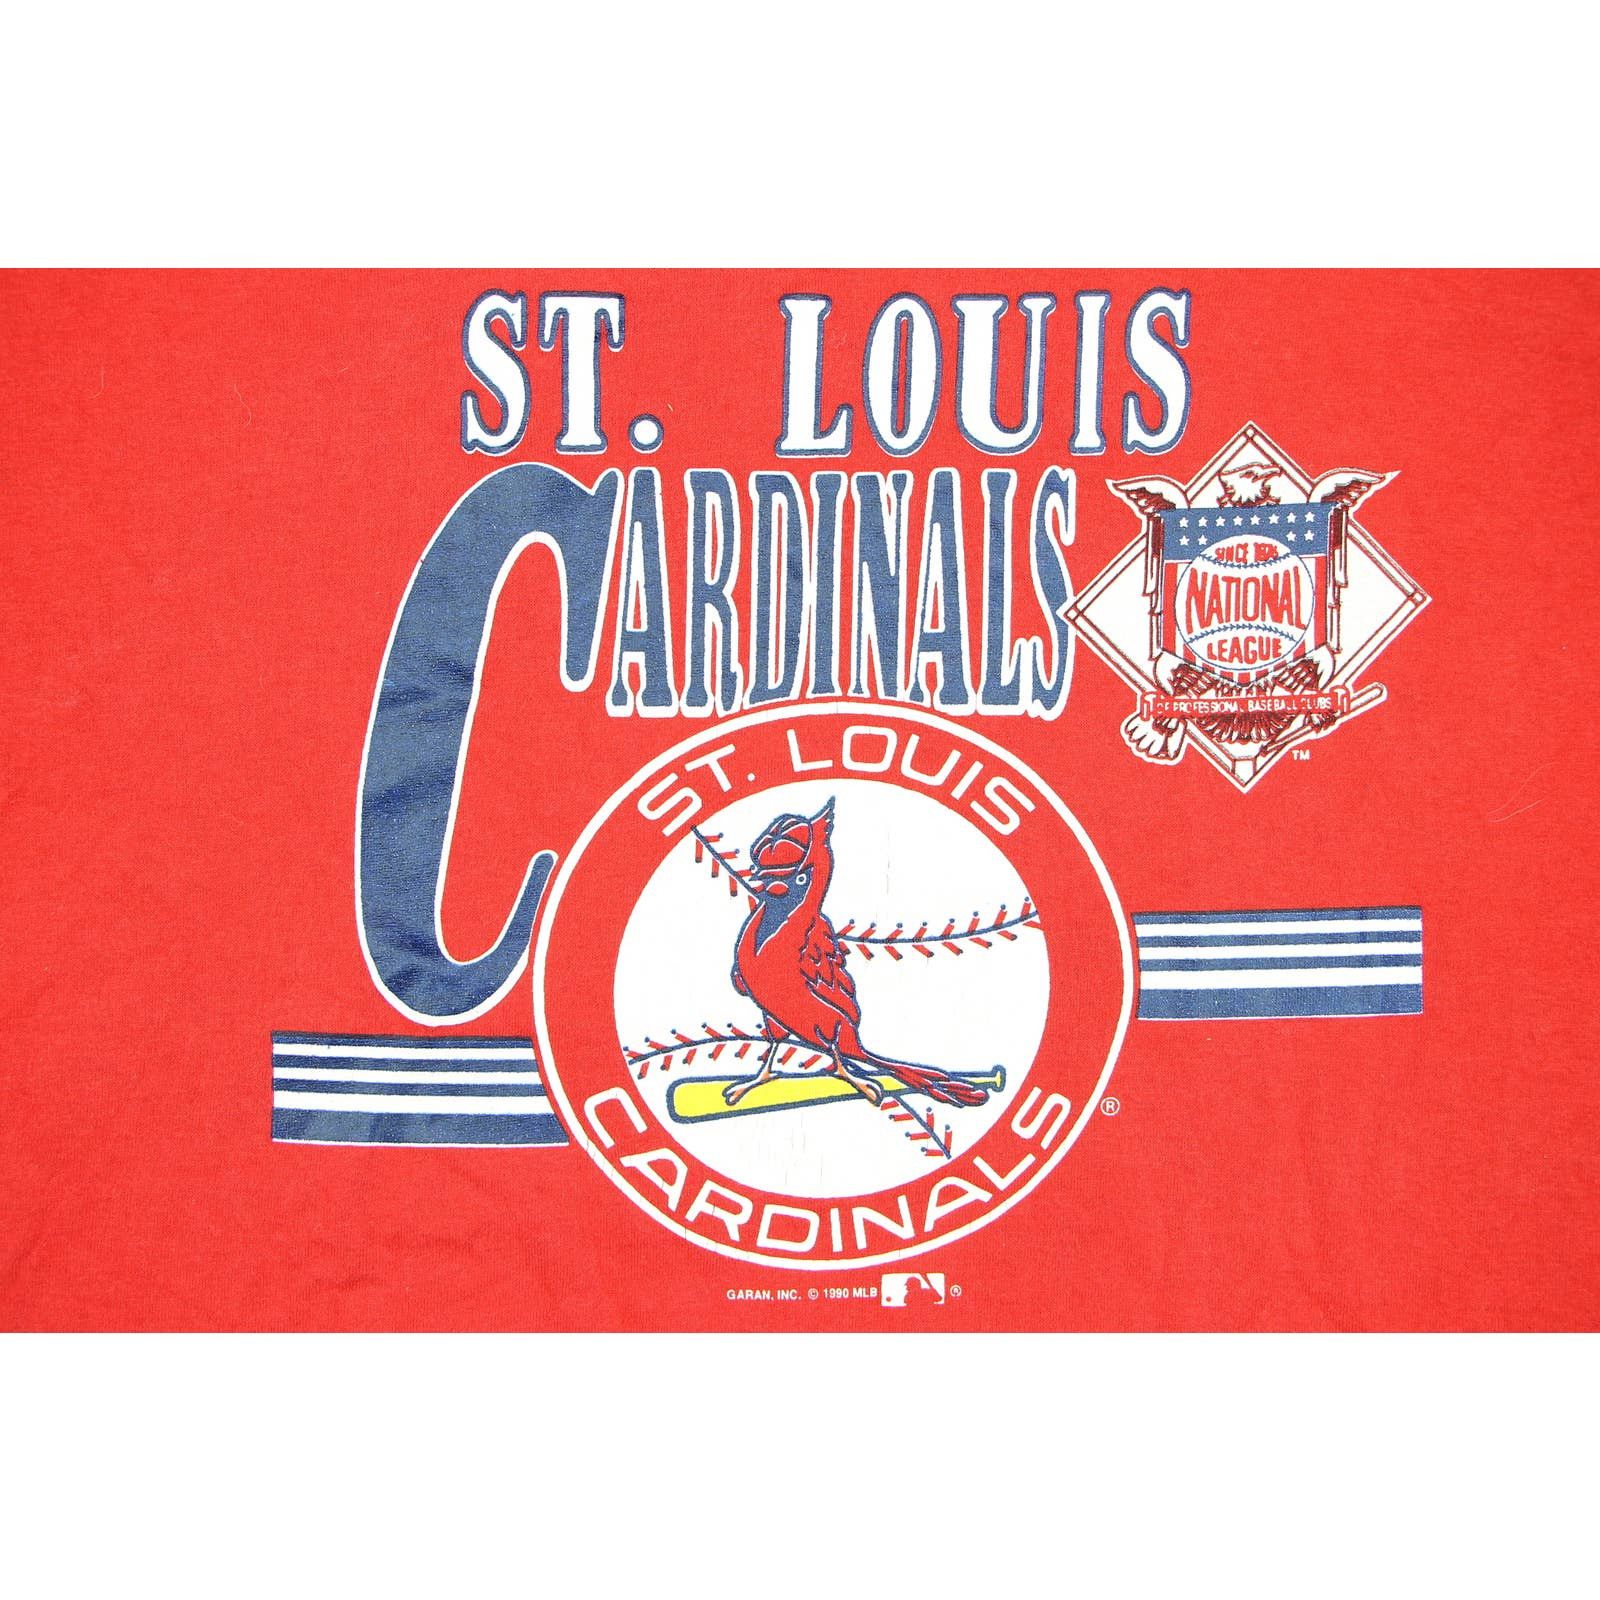 Vintage St Louis Cardinals T-shirt 90s MLB Baseball Made in USA – For All  To Envy